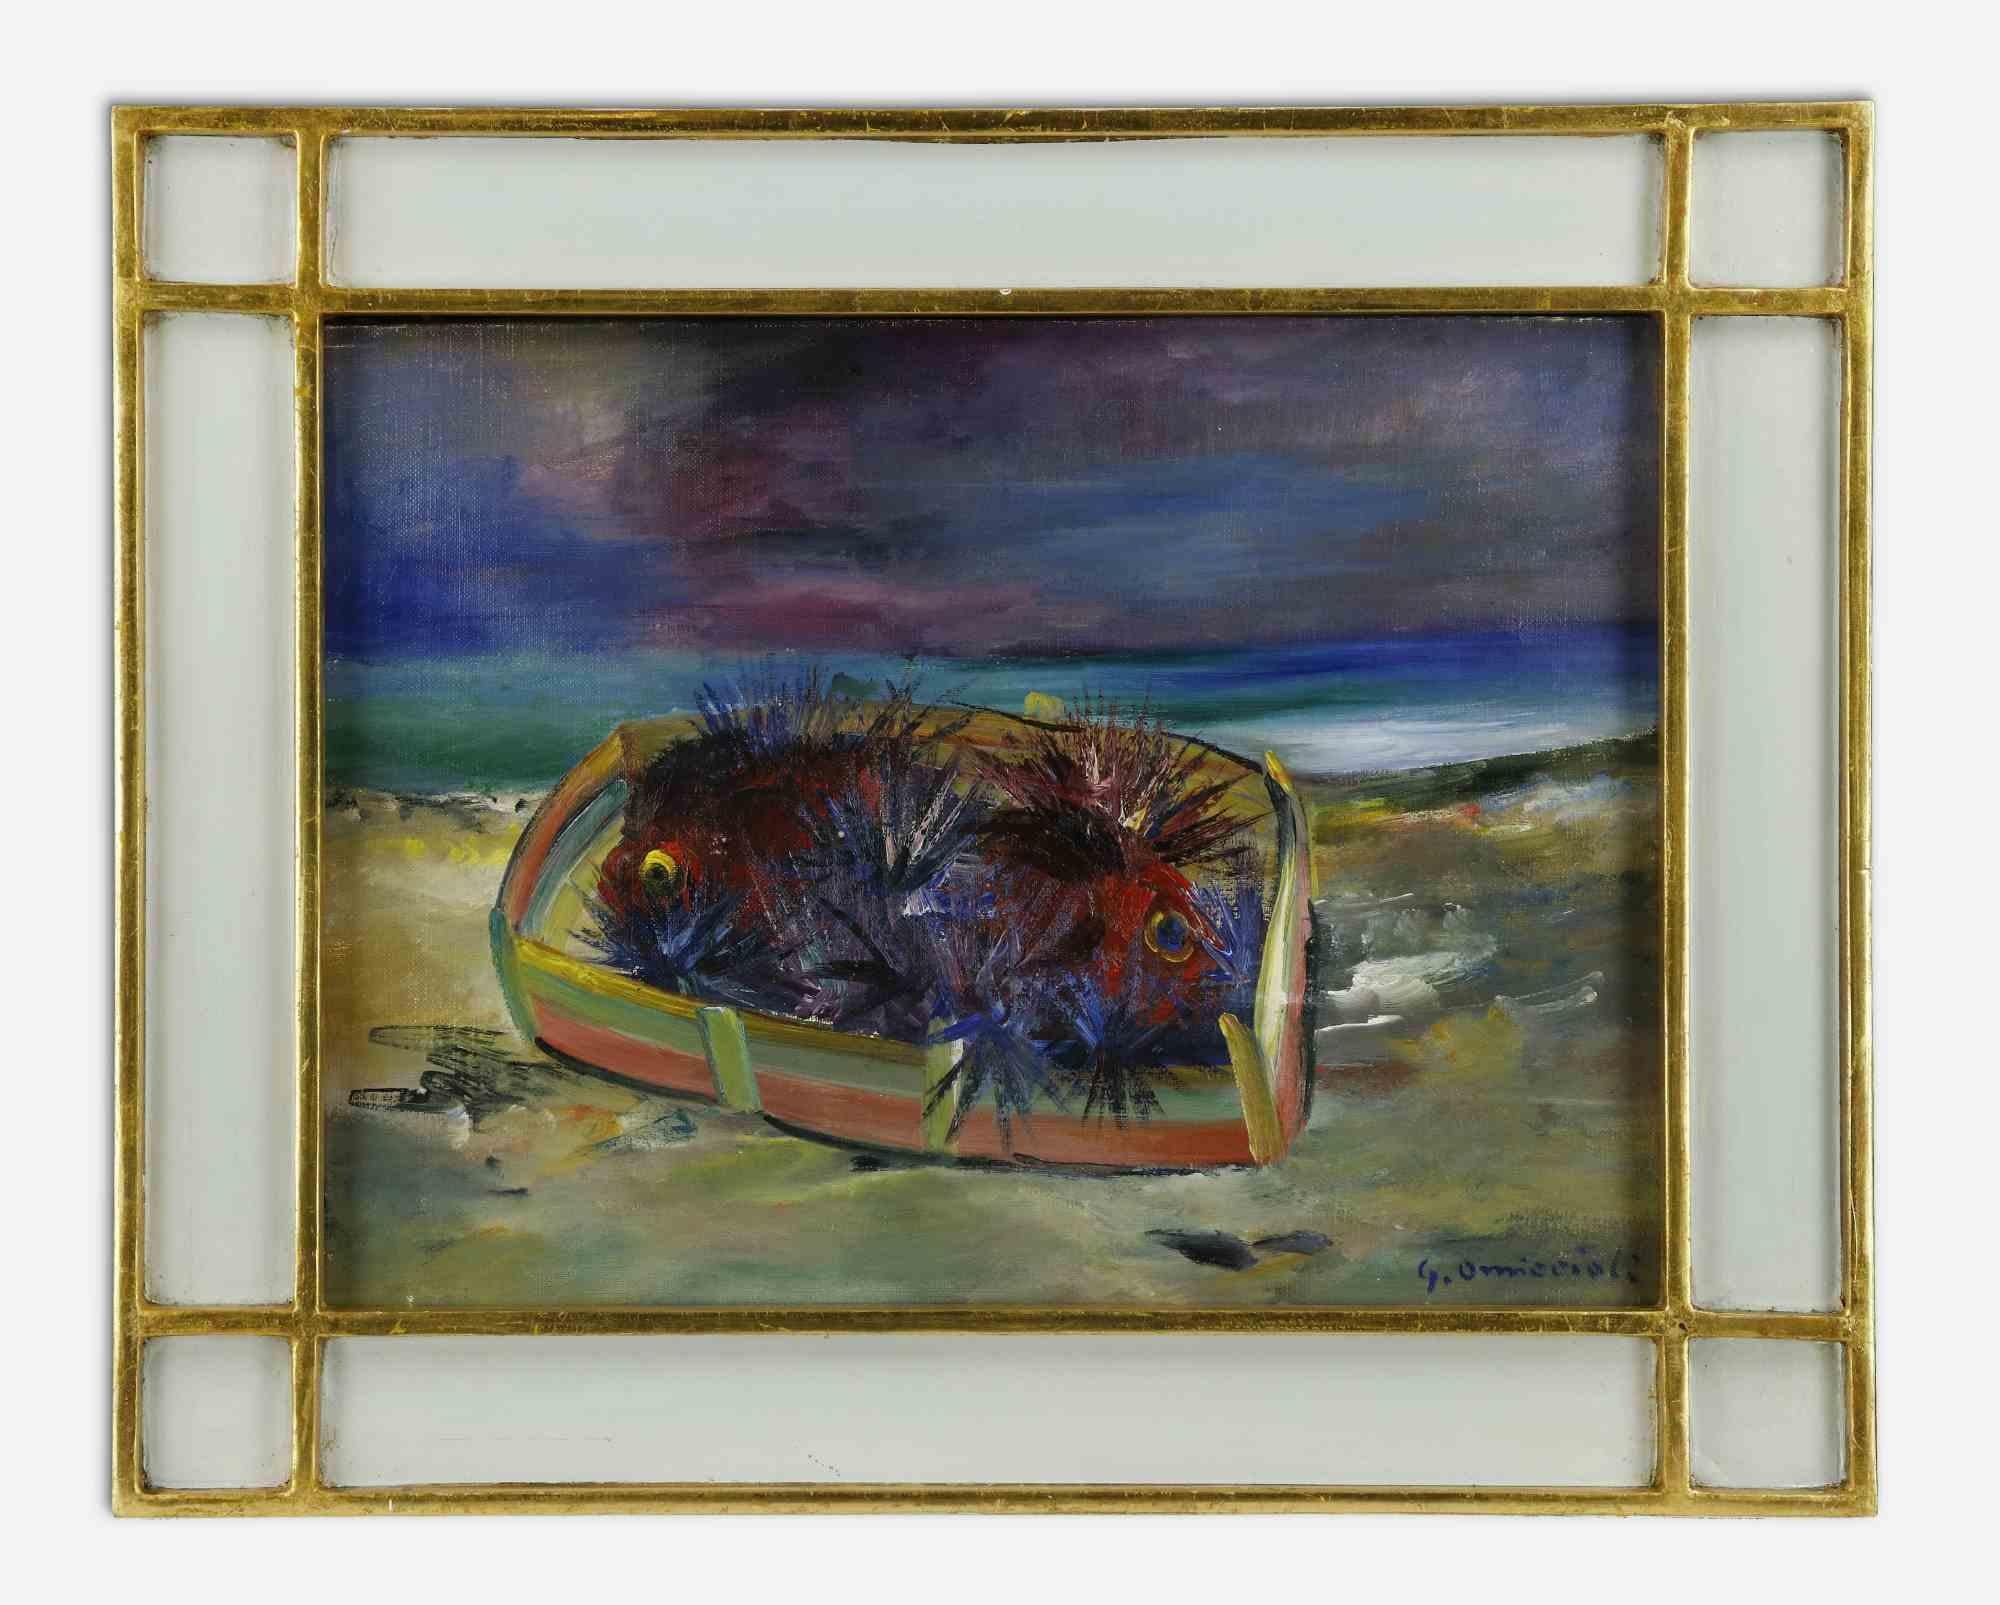 Sea urchins is an original artwork realized in the mid-20th Century by Giovanni Omiccioli (February 25, 1901 – March 1, 1975).

Original Colored oil on canvas.

Includes frame

Hand-signed on the lower right corner

Includes frame

Giovanni